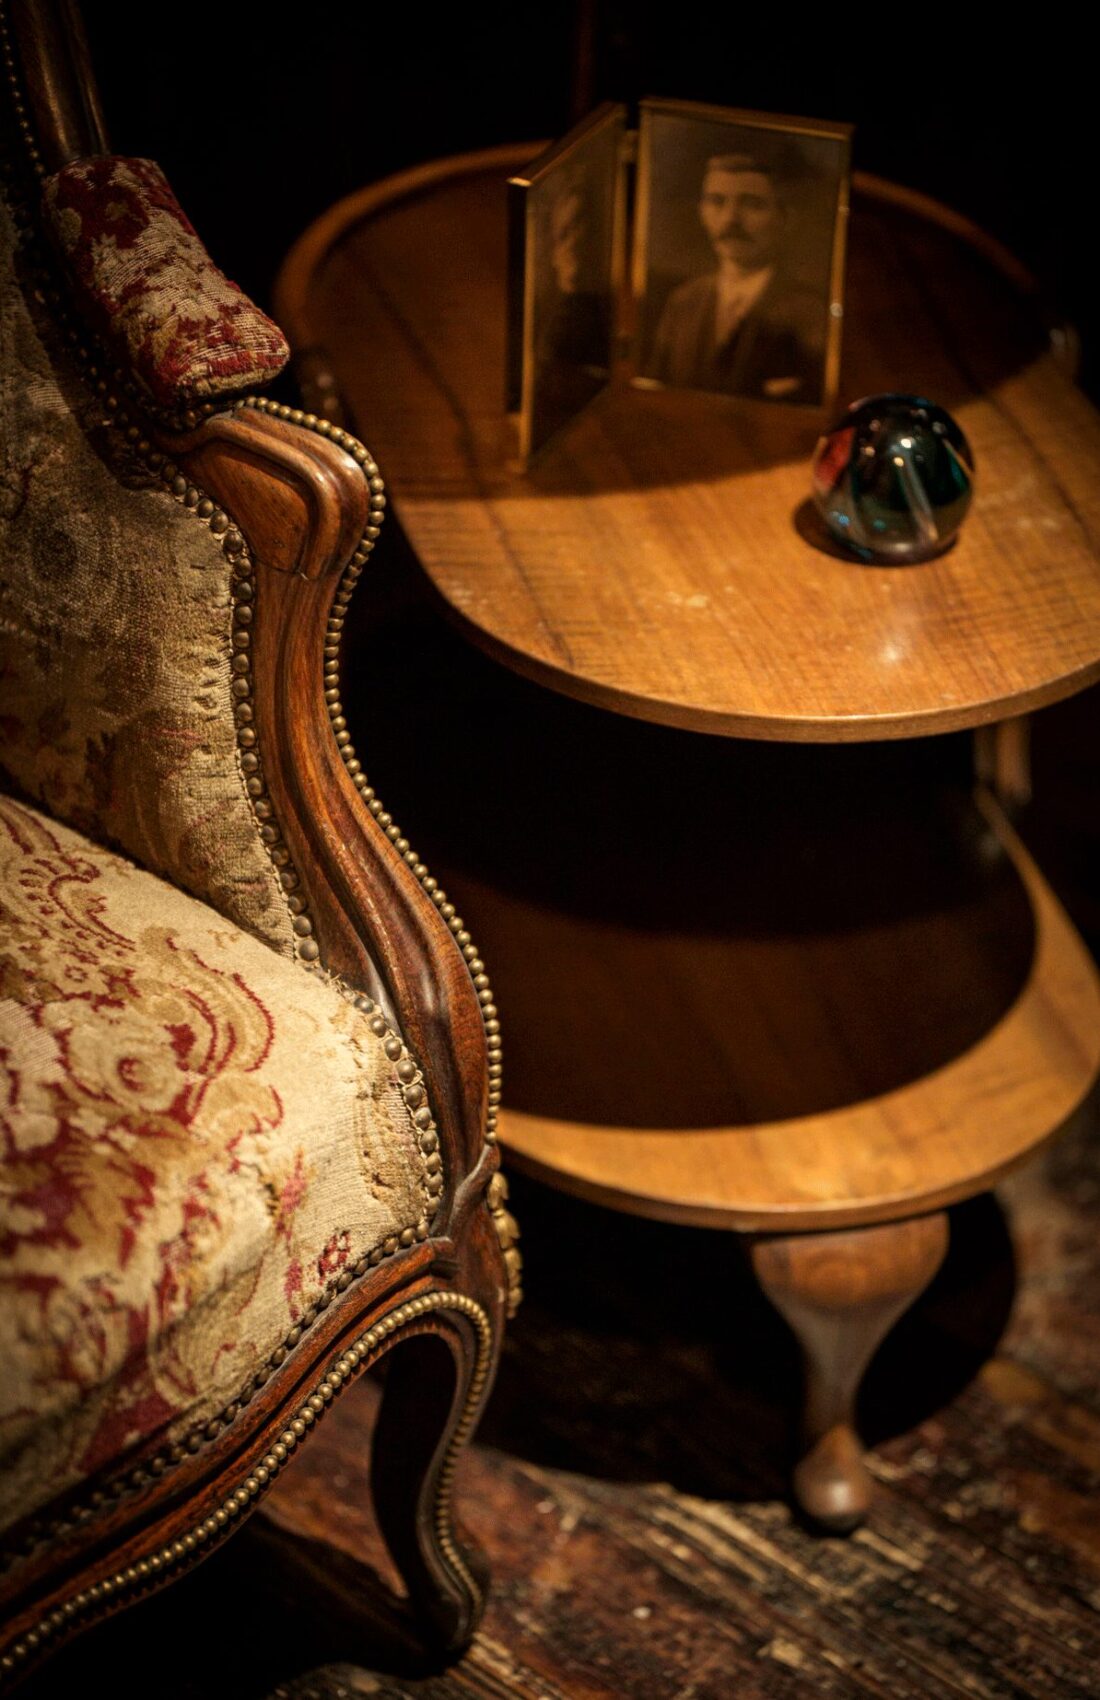 Reclaimed vintage upholstered chair, inside Good's Way music venue and events space in King's Cross, London, designed by 3Stories Interior Design and Branding creative agency